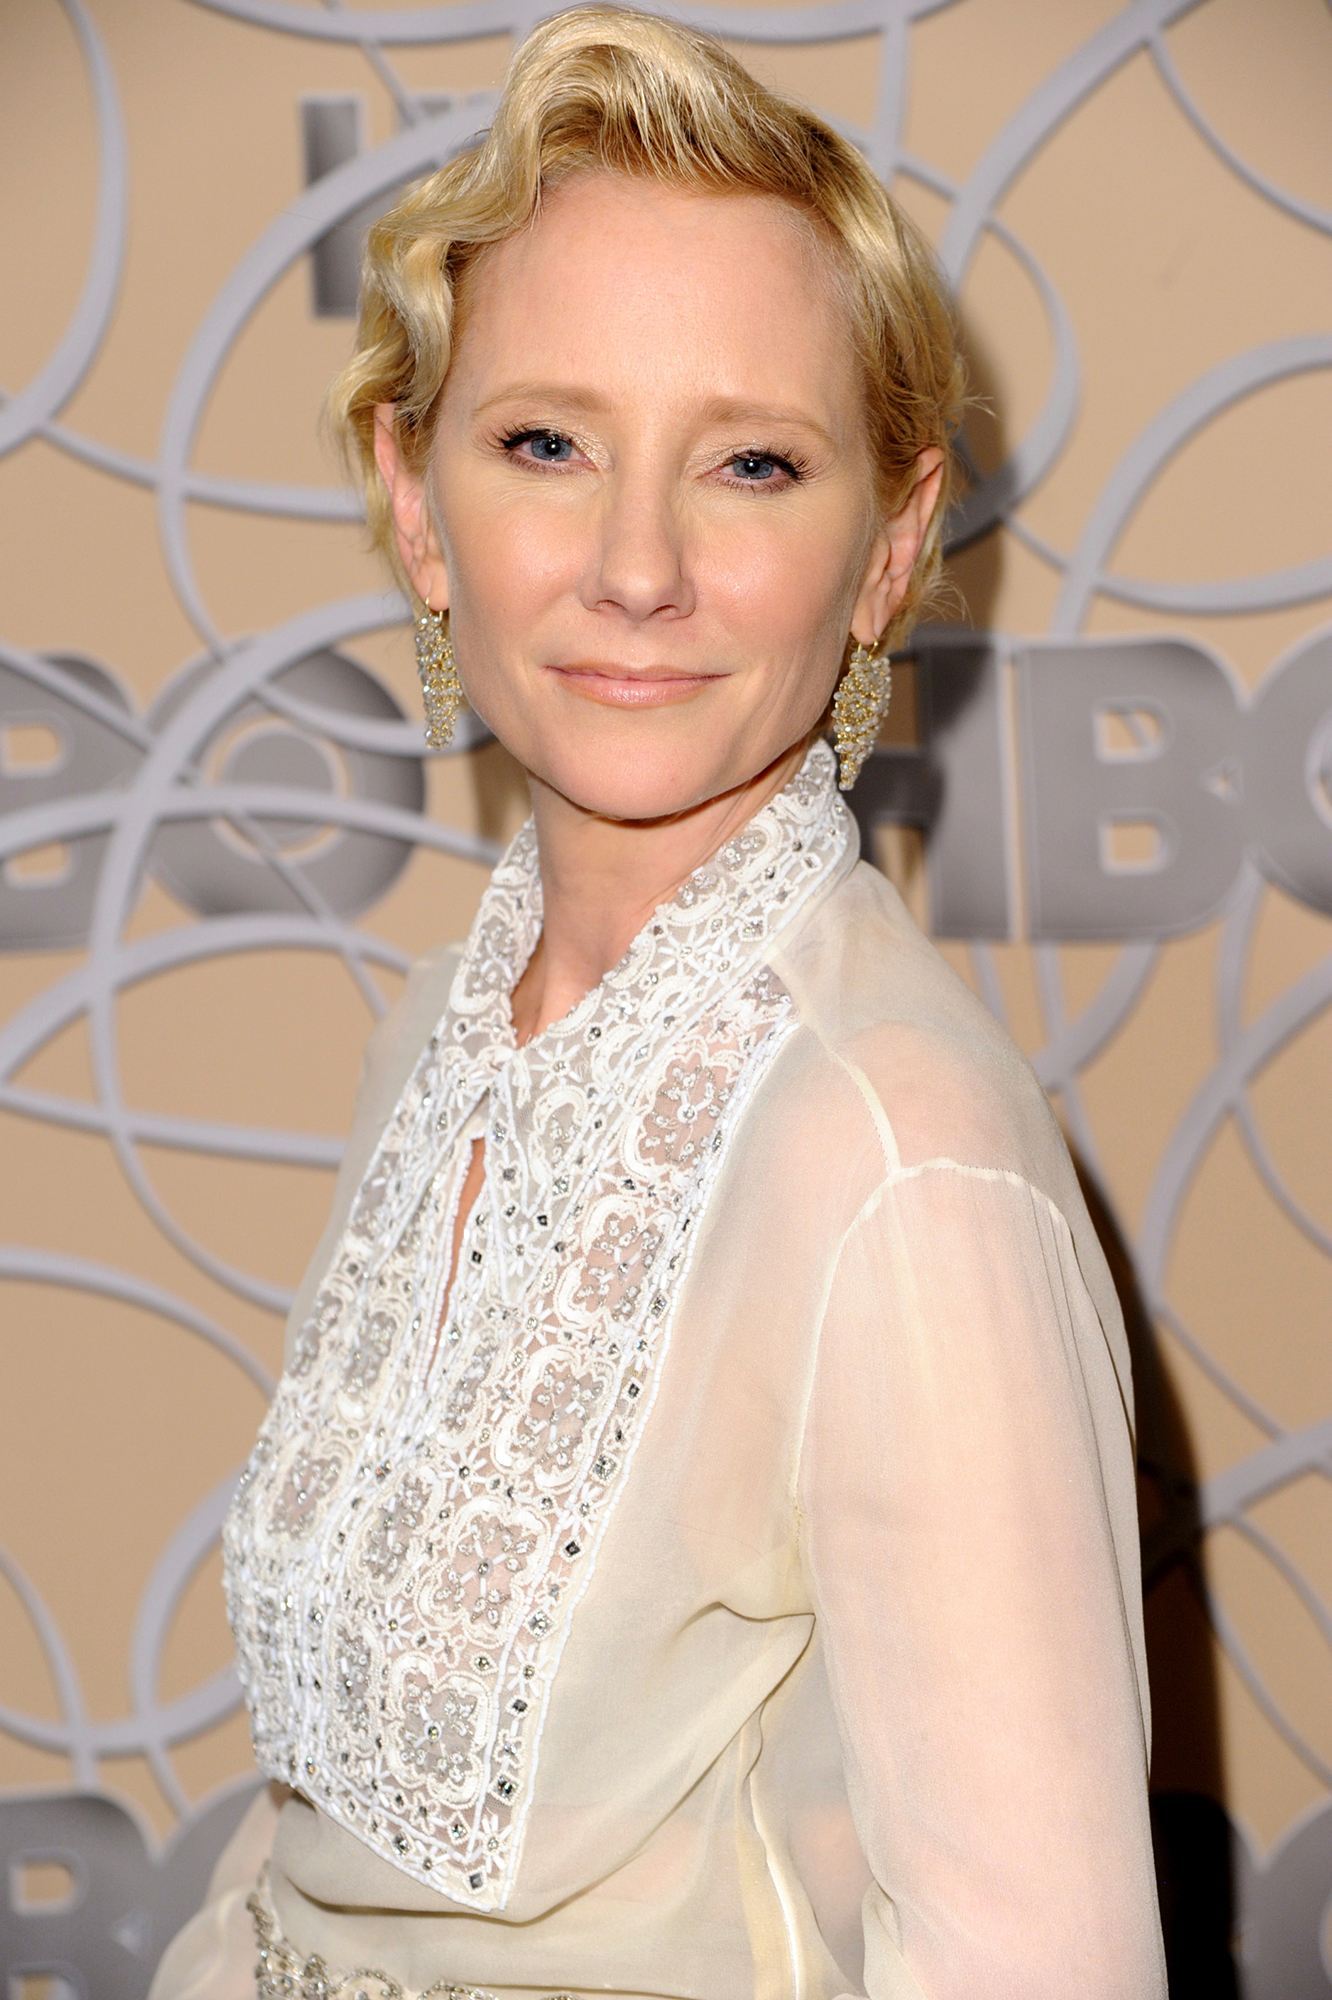 Anne Heche Is in a Coma Following Car Crash: Everything to Know About the Incident, Aftermath